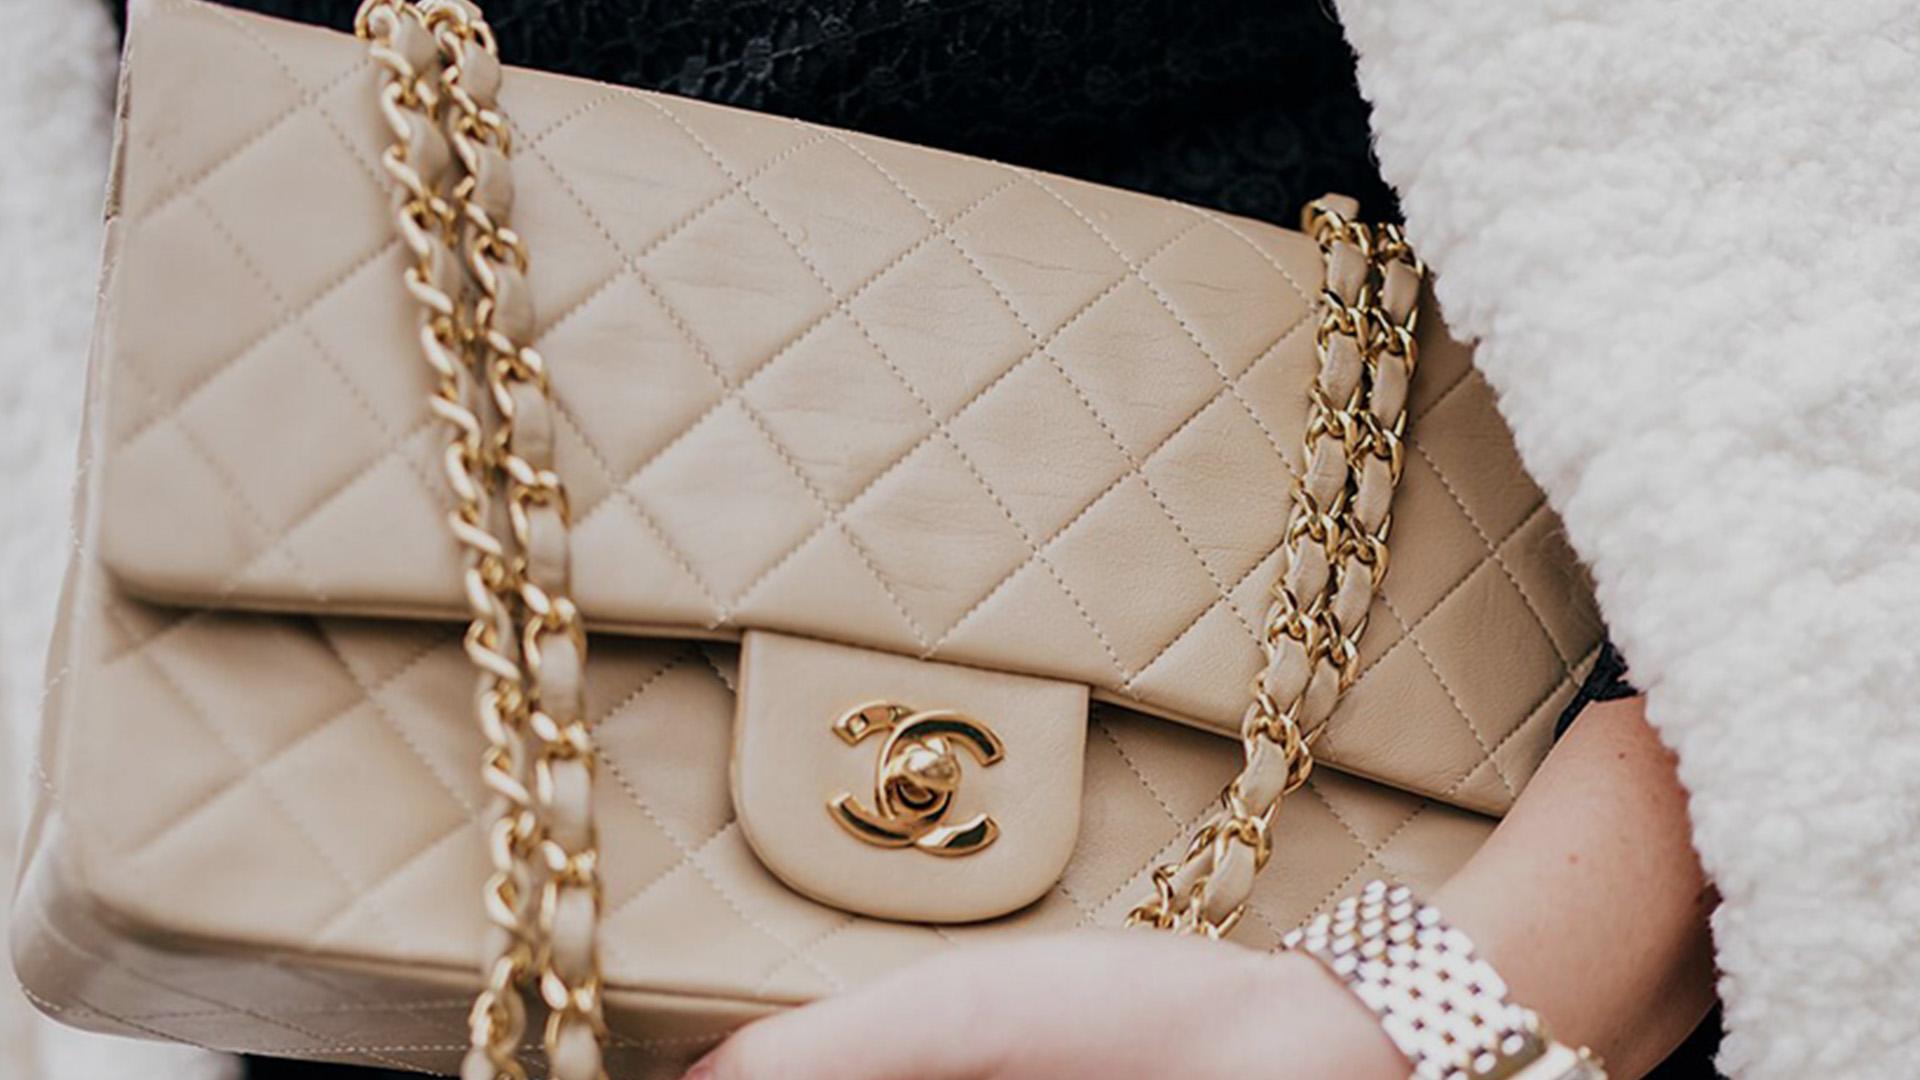 Chanel Price Increase - Academy by FASHIONPHILE